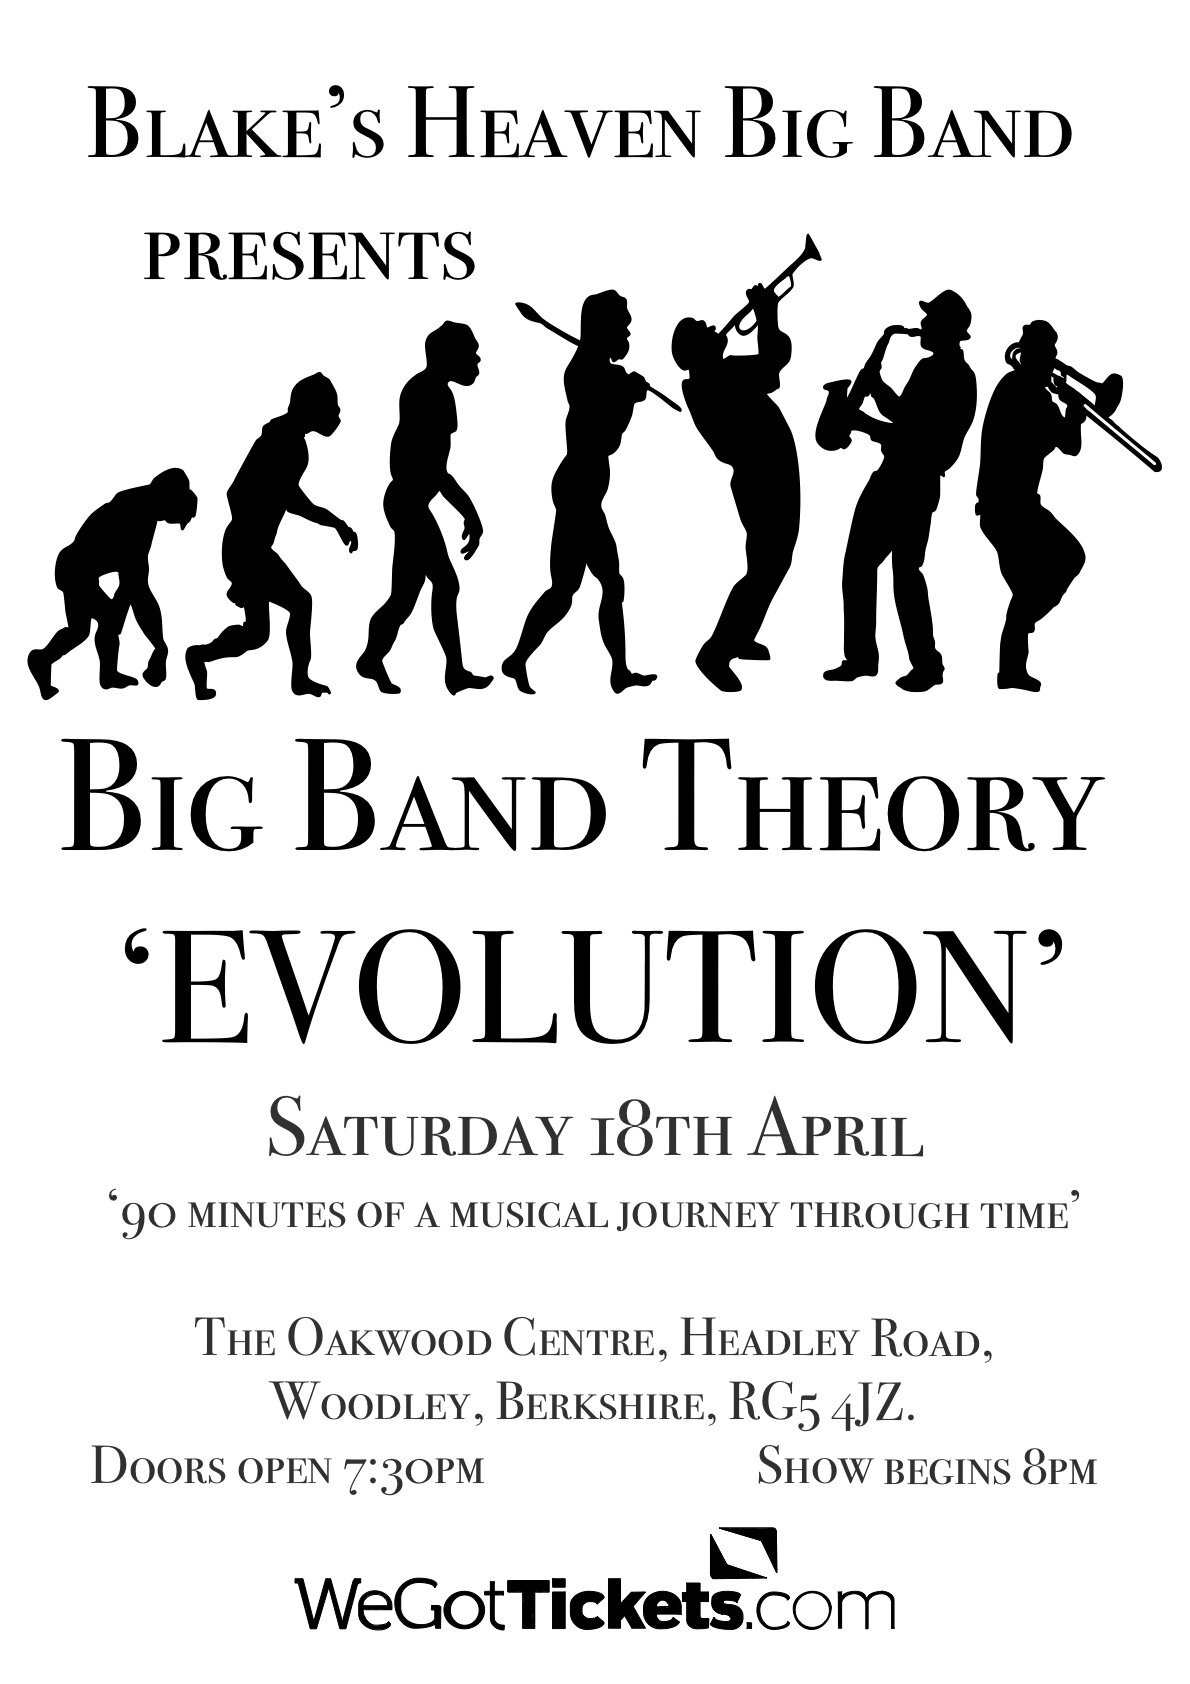 Blake's Heaven Big Band Theory - gig poster. Saturday 18th April 2020 - The Oakwood Centre Woodley